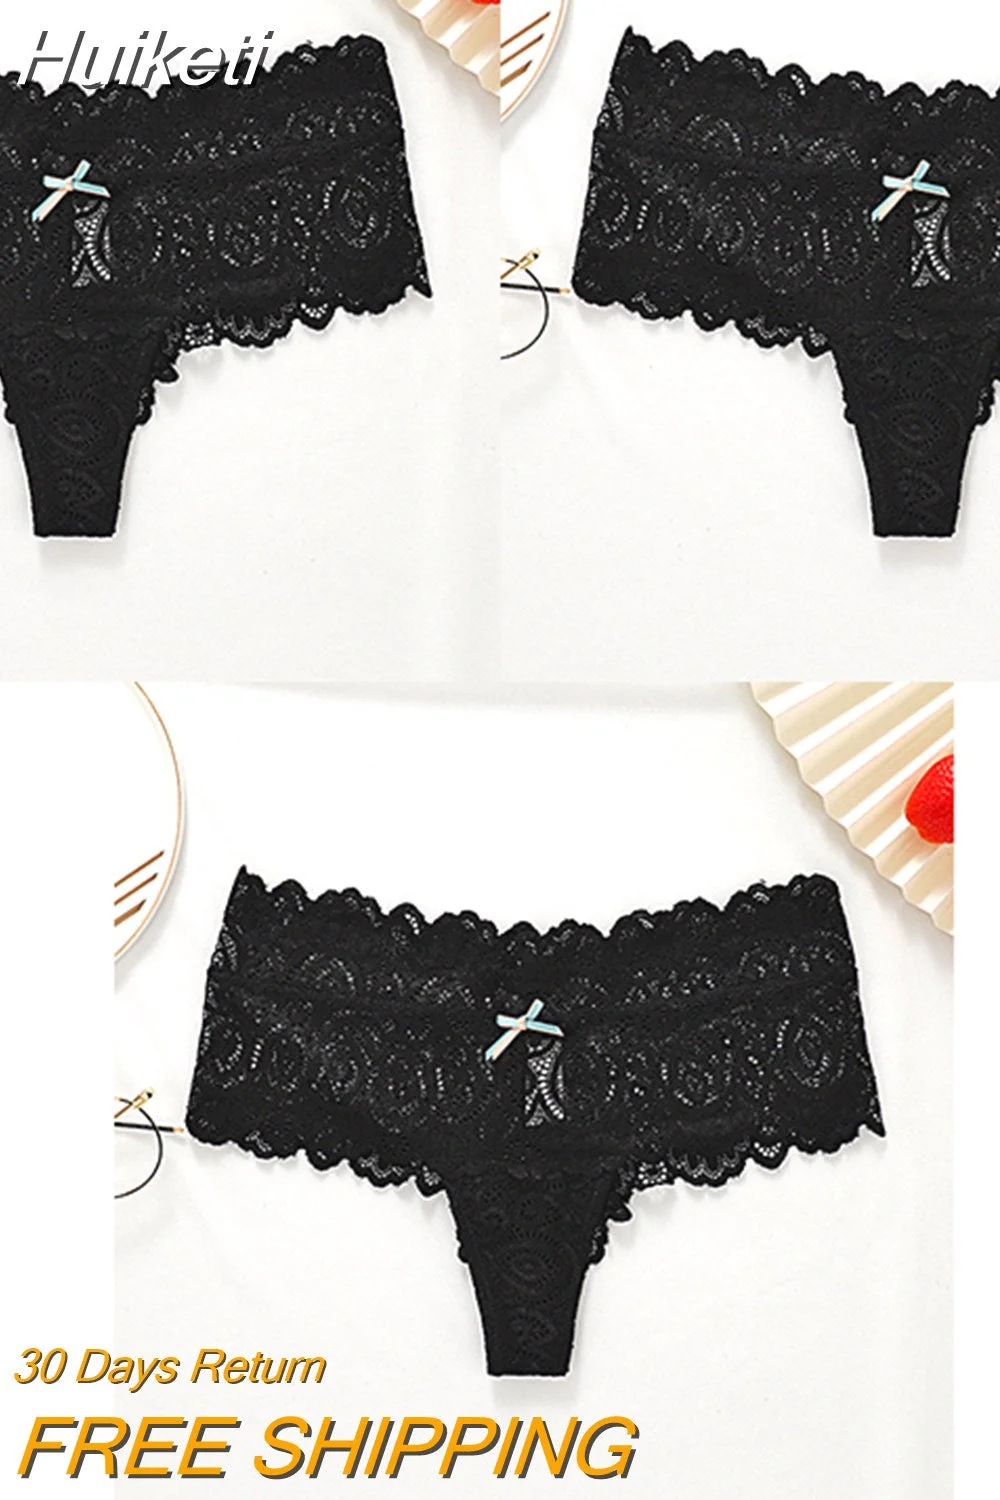 Huiketi Lace Women Briefs Sexy High Waist Panties High Quality Floral Female Underpants See Through Lingerie Comfort Thongs